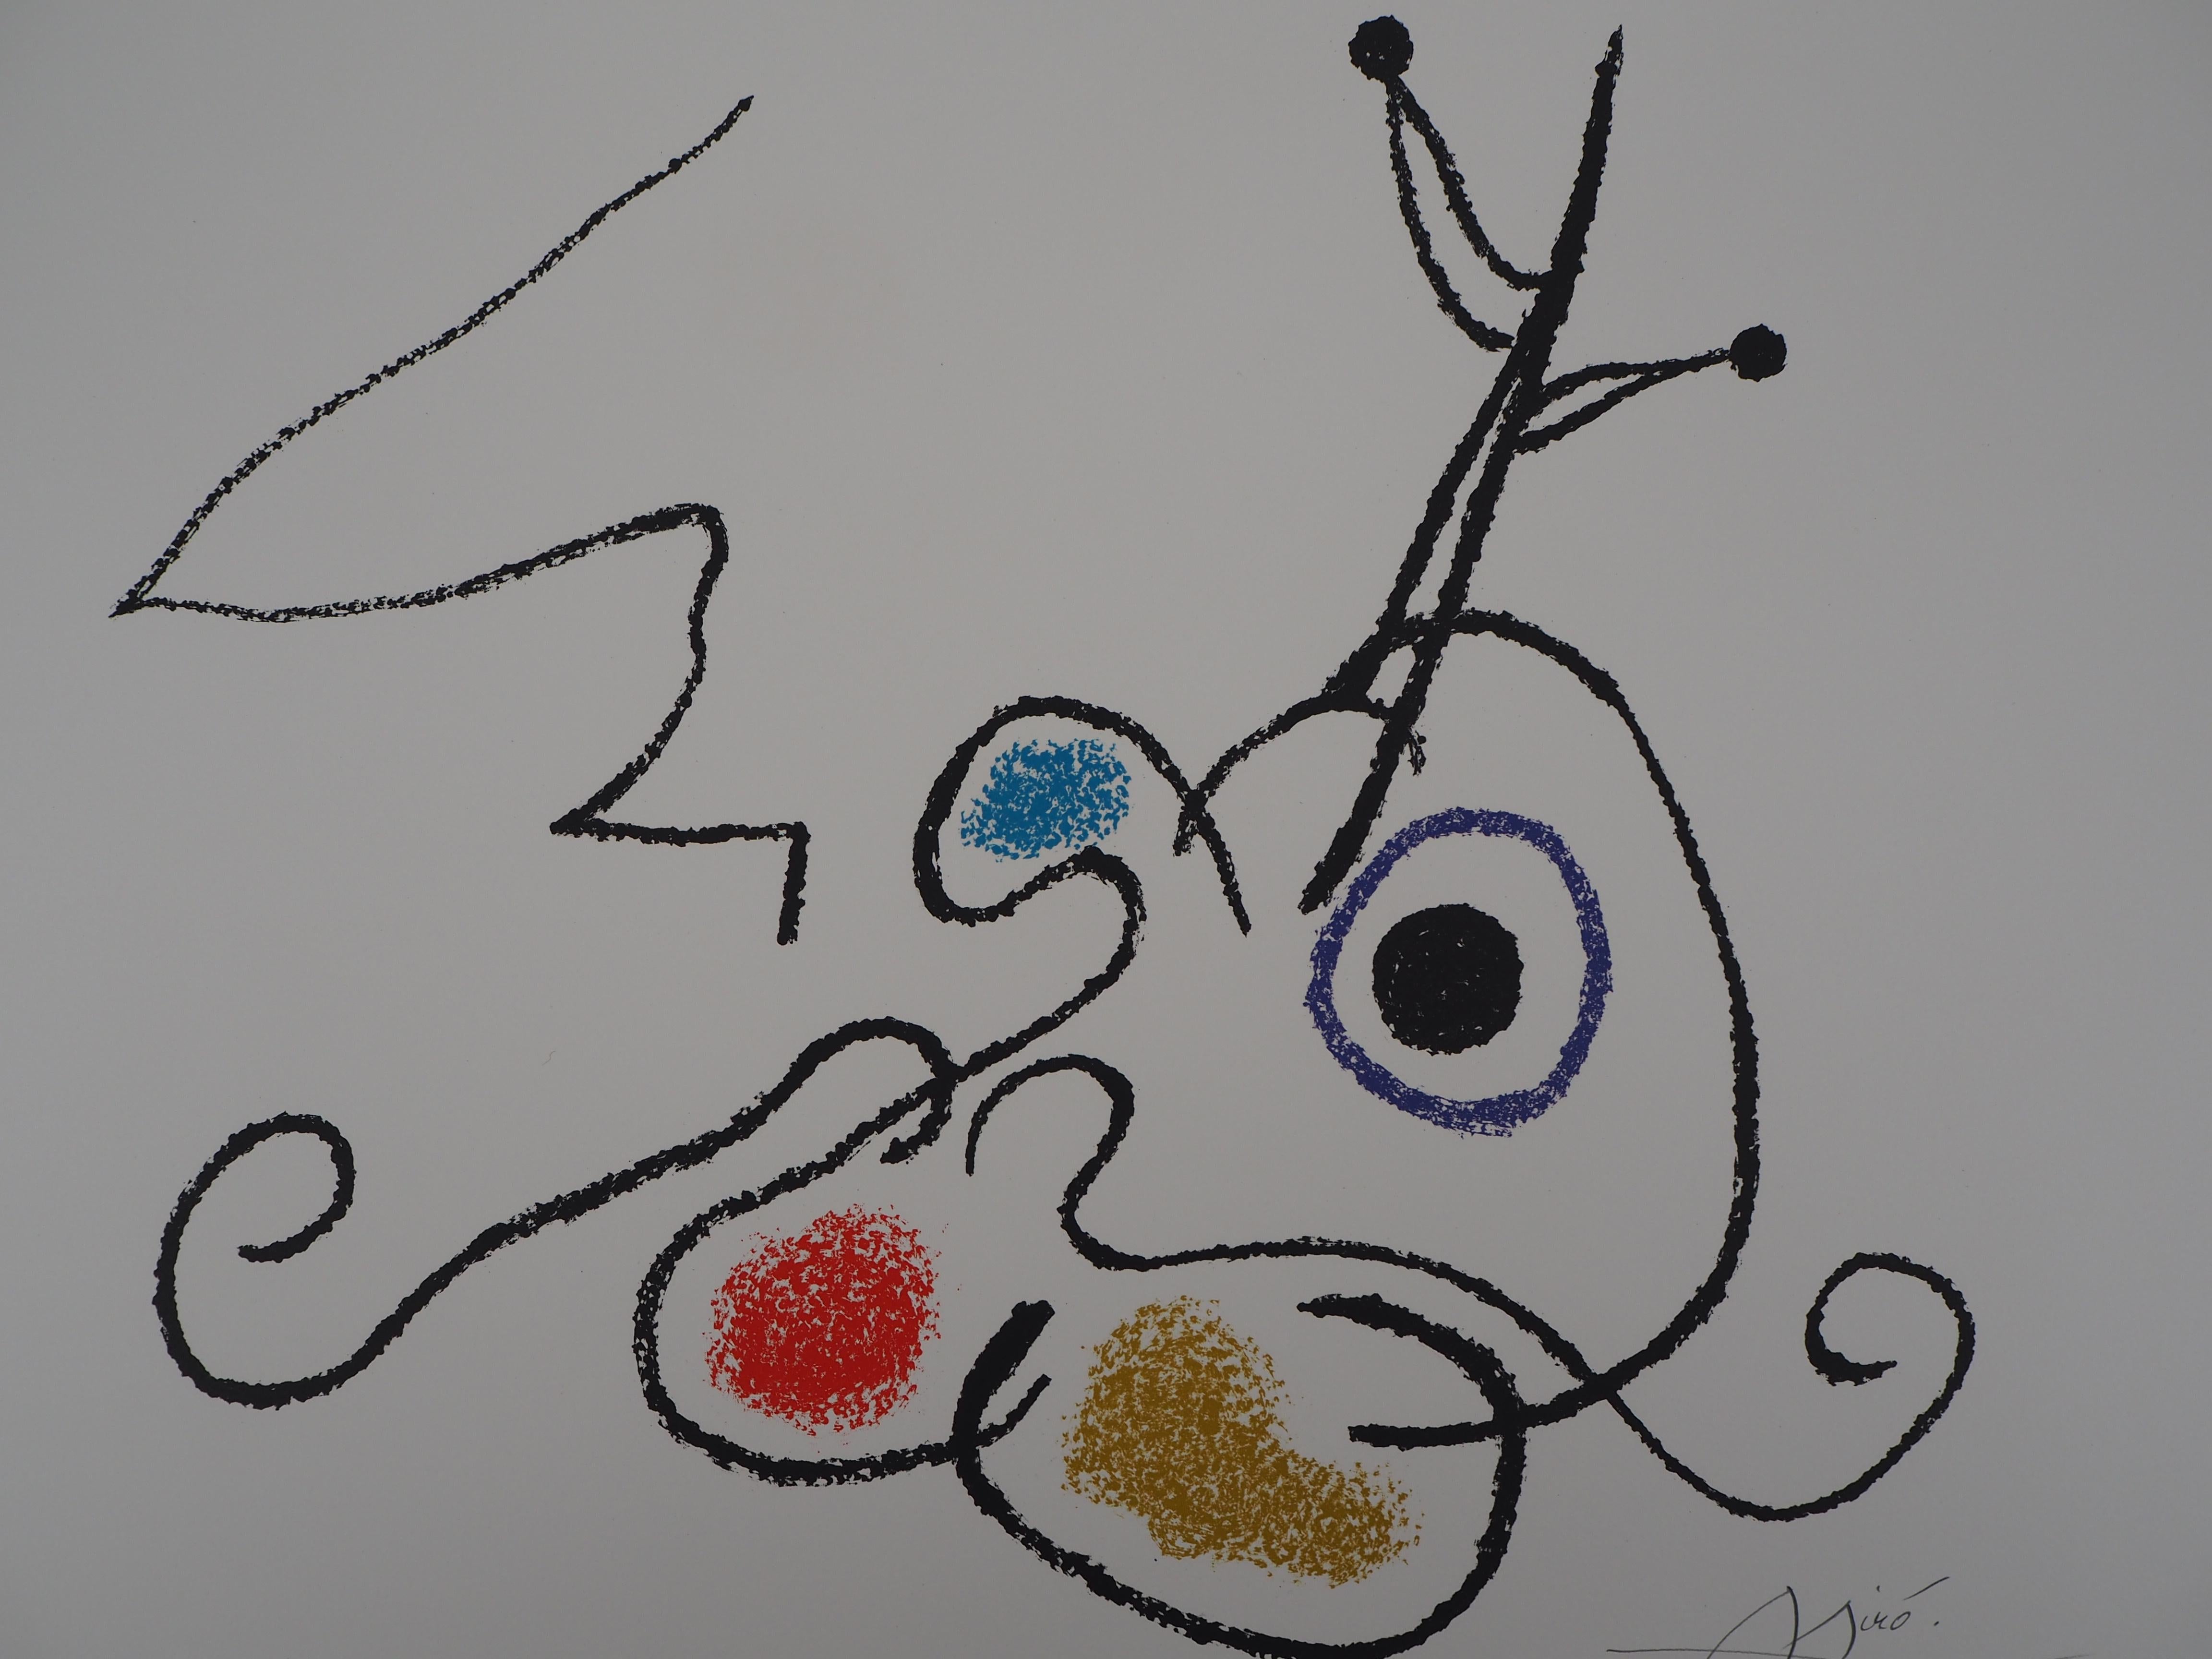 Ubu : Surrealist Composition  - Original Handsigned Lithograph - Mourlot 1971 - Abstract Print by Joan Miró